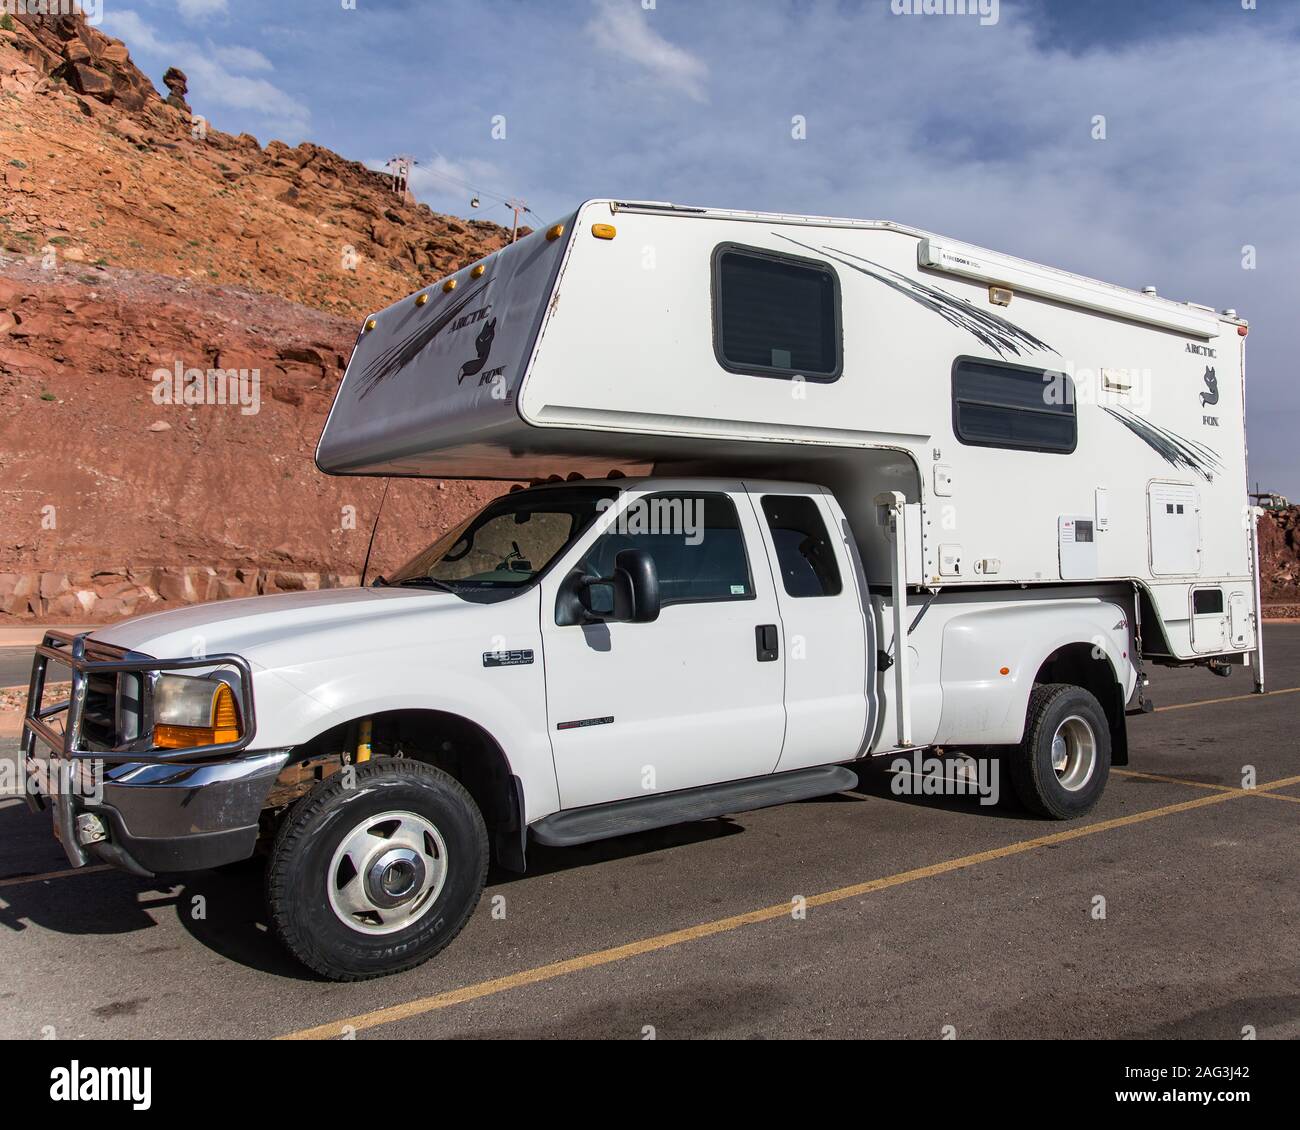 Arctic Fox truck camper on a 1999 4WD Ford F-350 Diesel Truck. Stock Photo